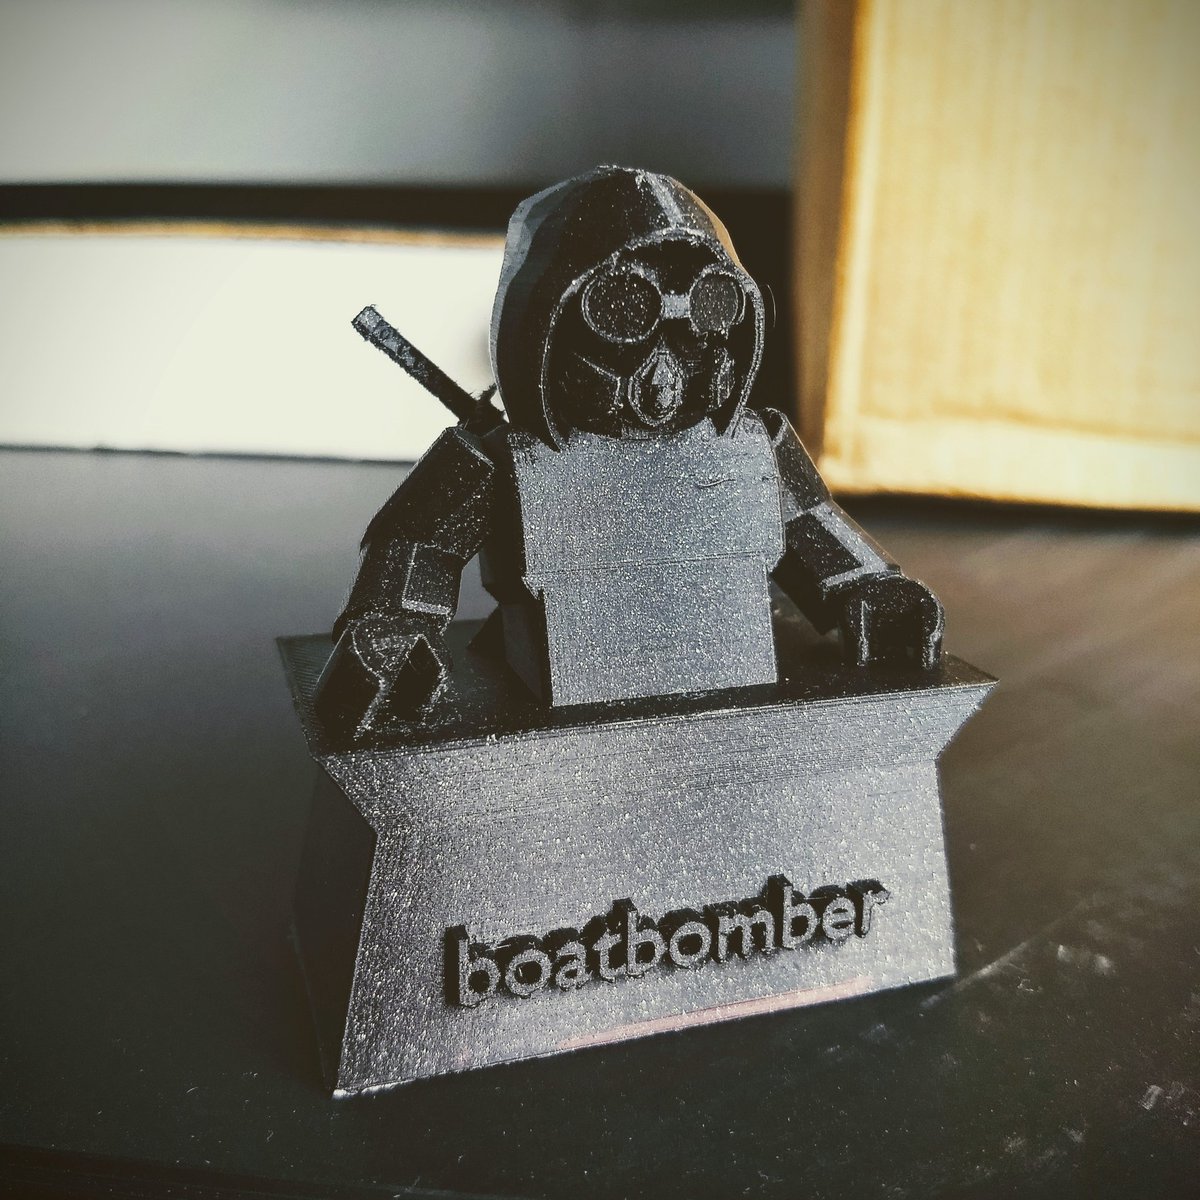 Boatbomber On Twitter 3d Printed My Roblox Avatar To Put On My Desk Ugc Is Awesome Roblox - youngest roblox developer